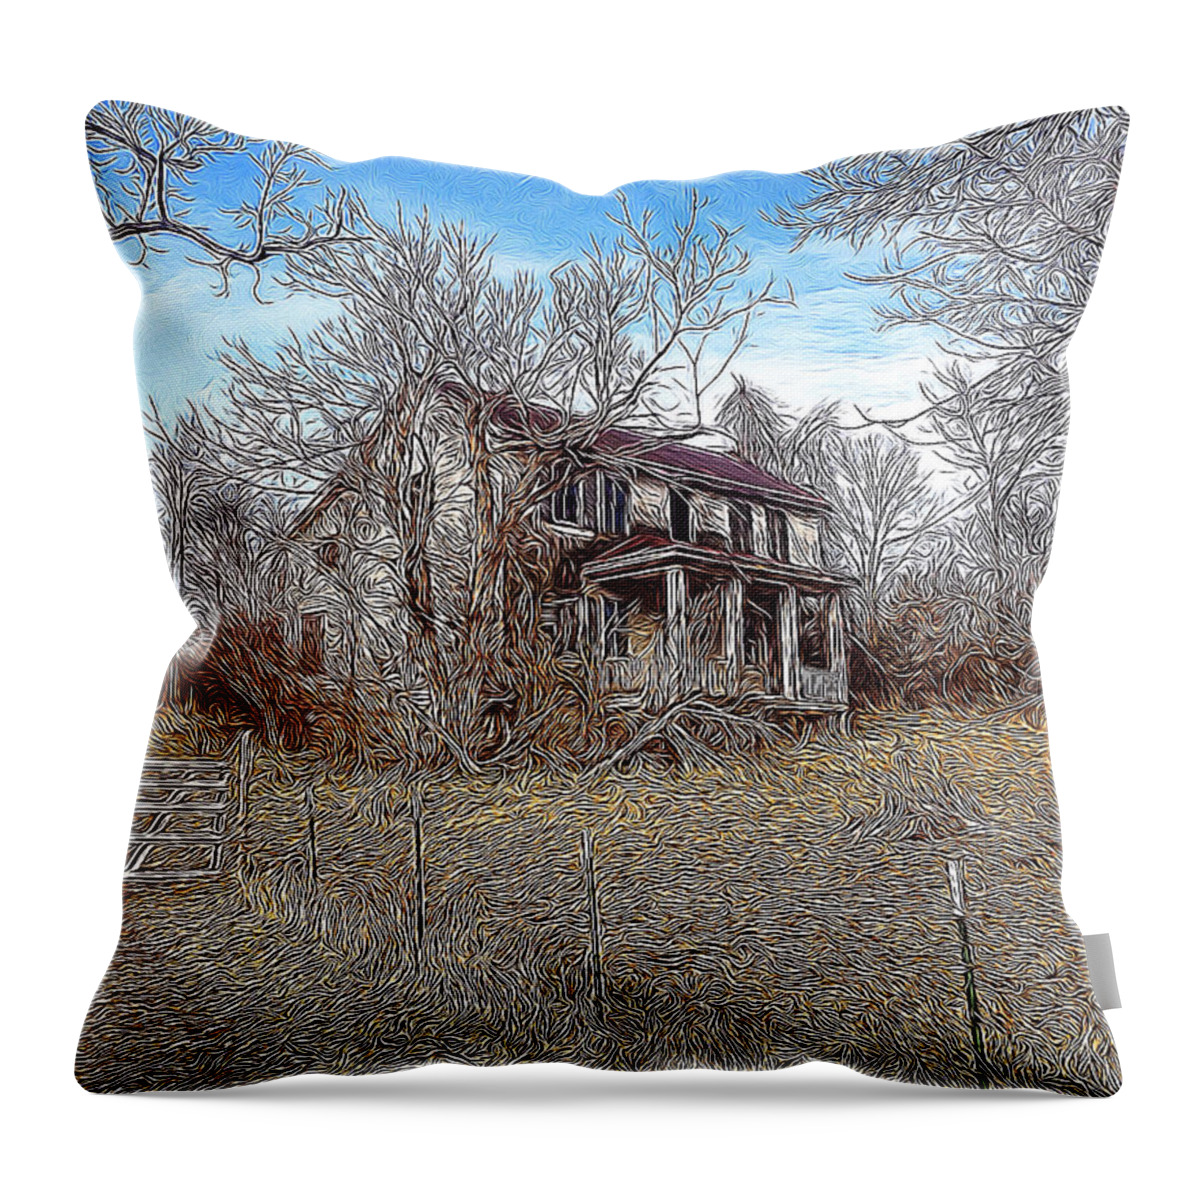 Historical Throw Pillow featuring the digital art This Old House by Ruben Carrillo